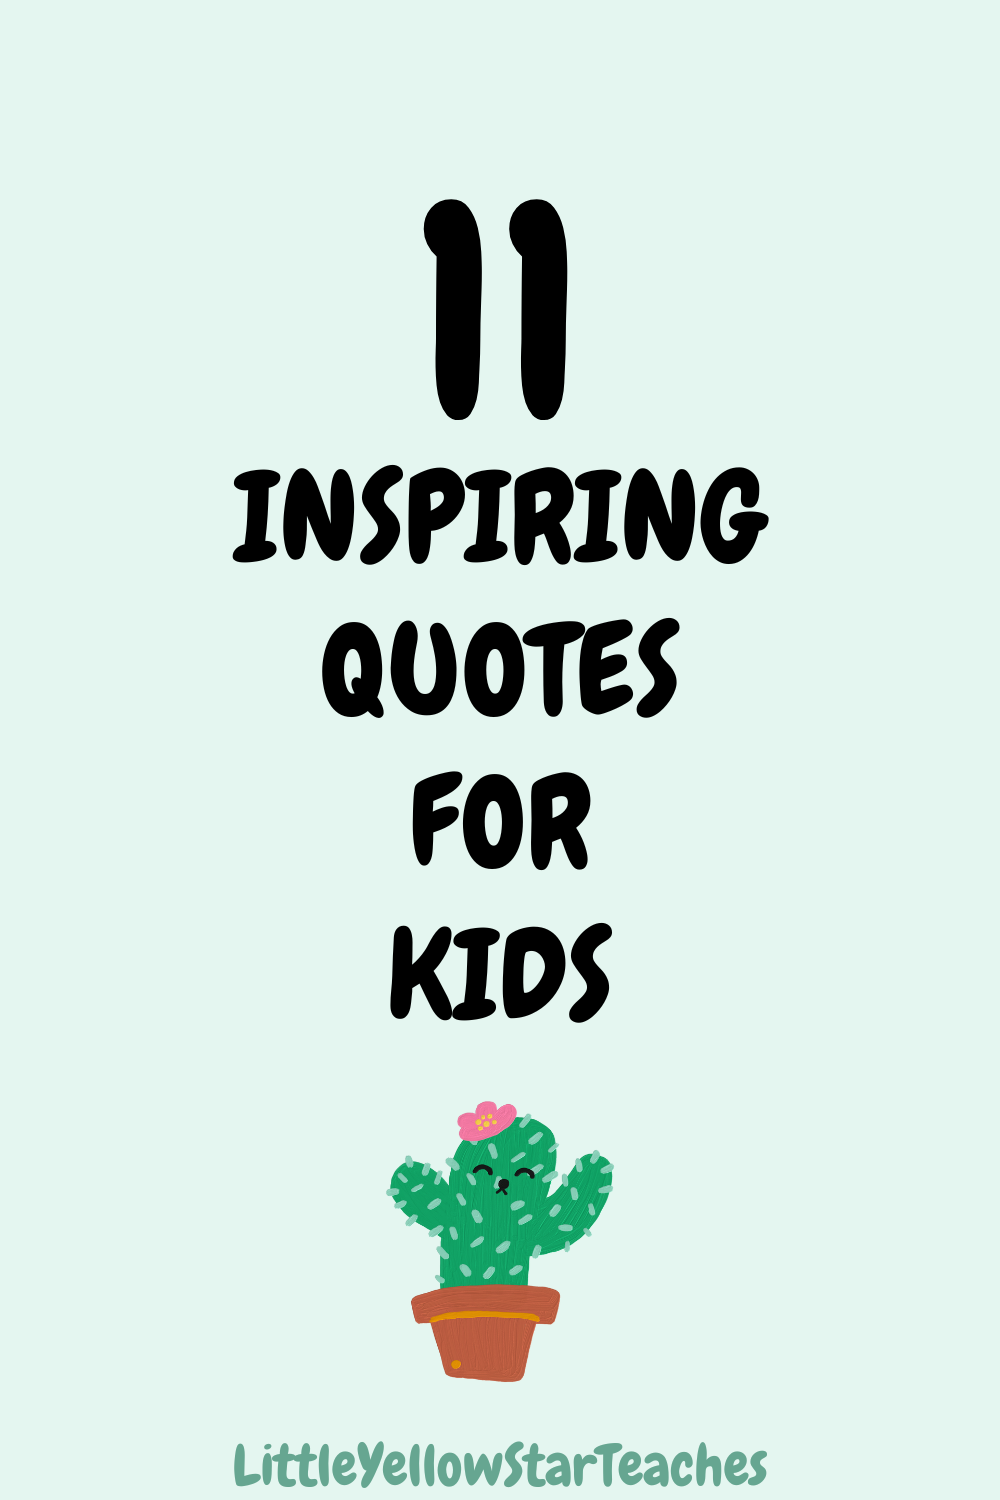 11 inspiring quotes for kids